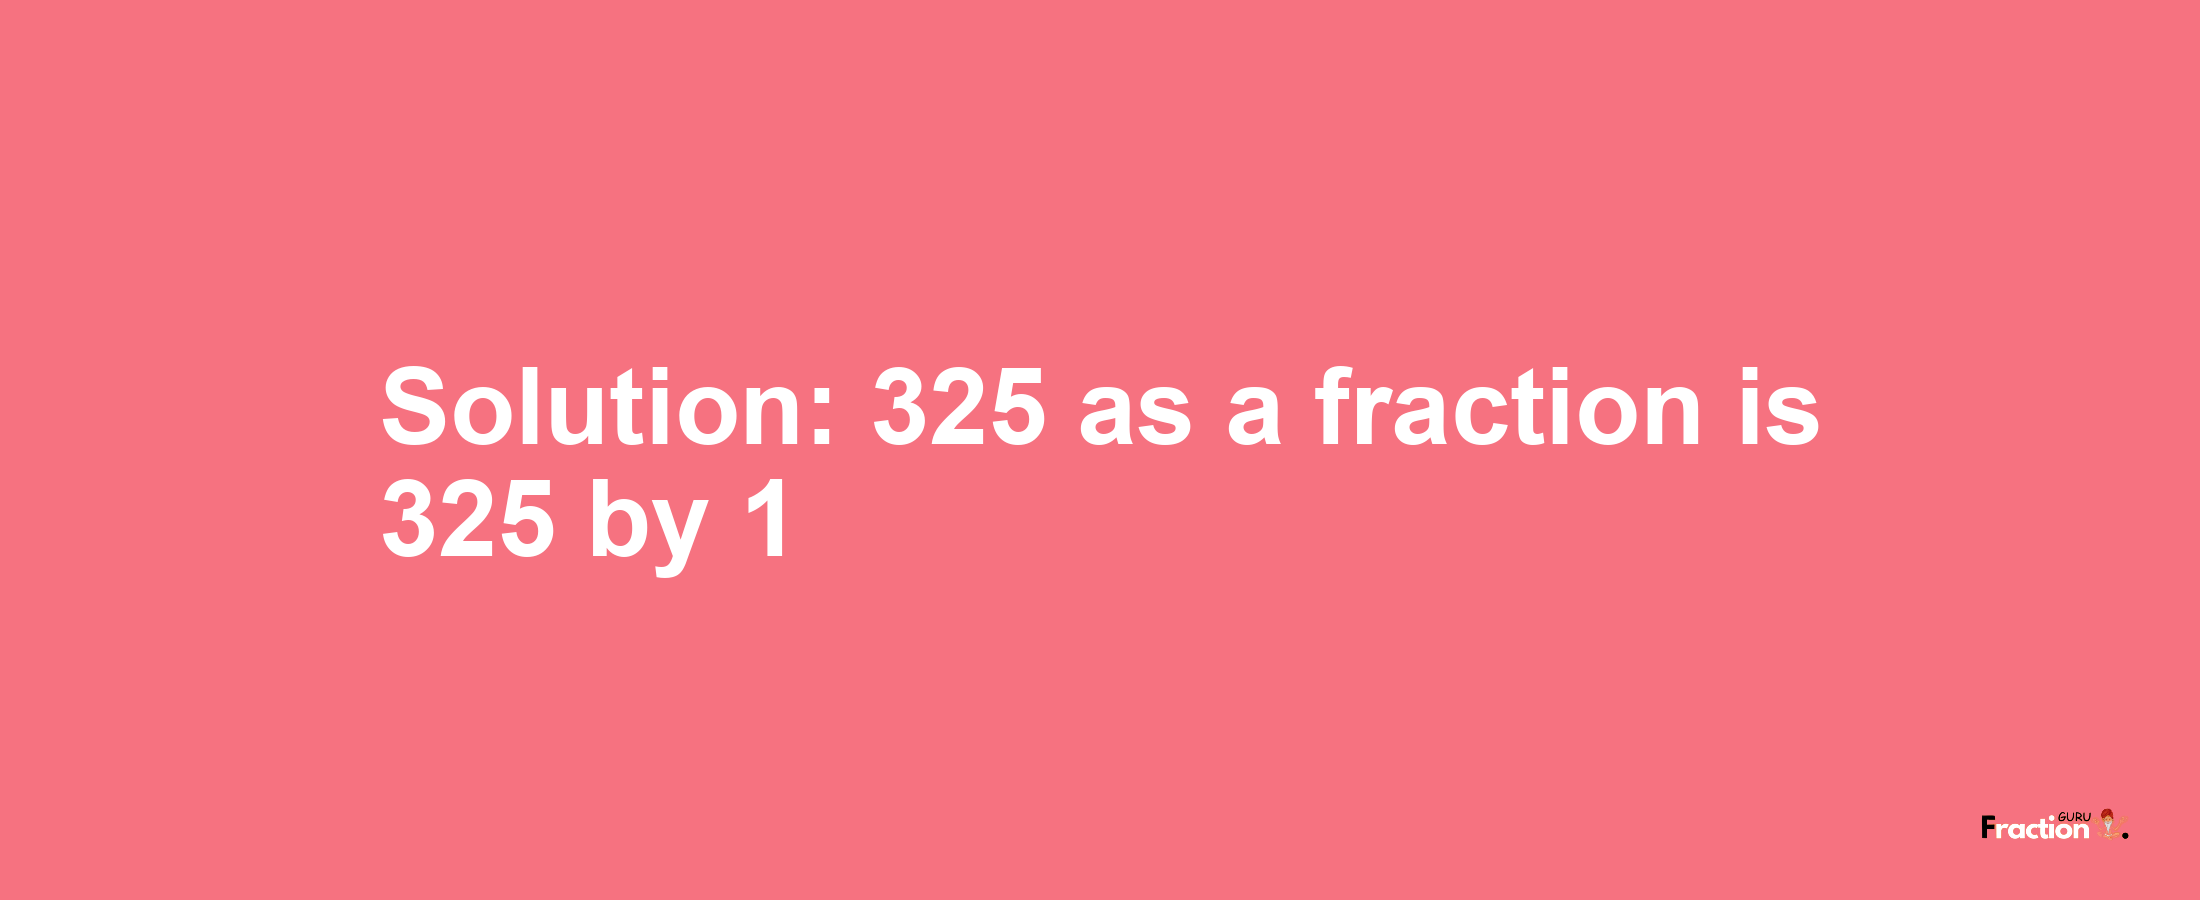 Solution:325 as a fraction is 325/1